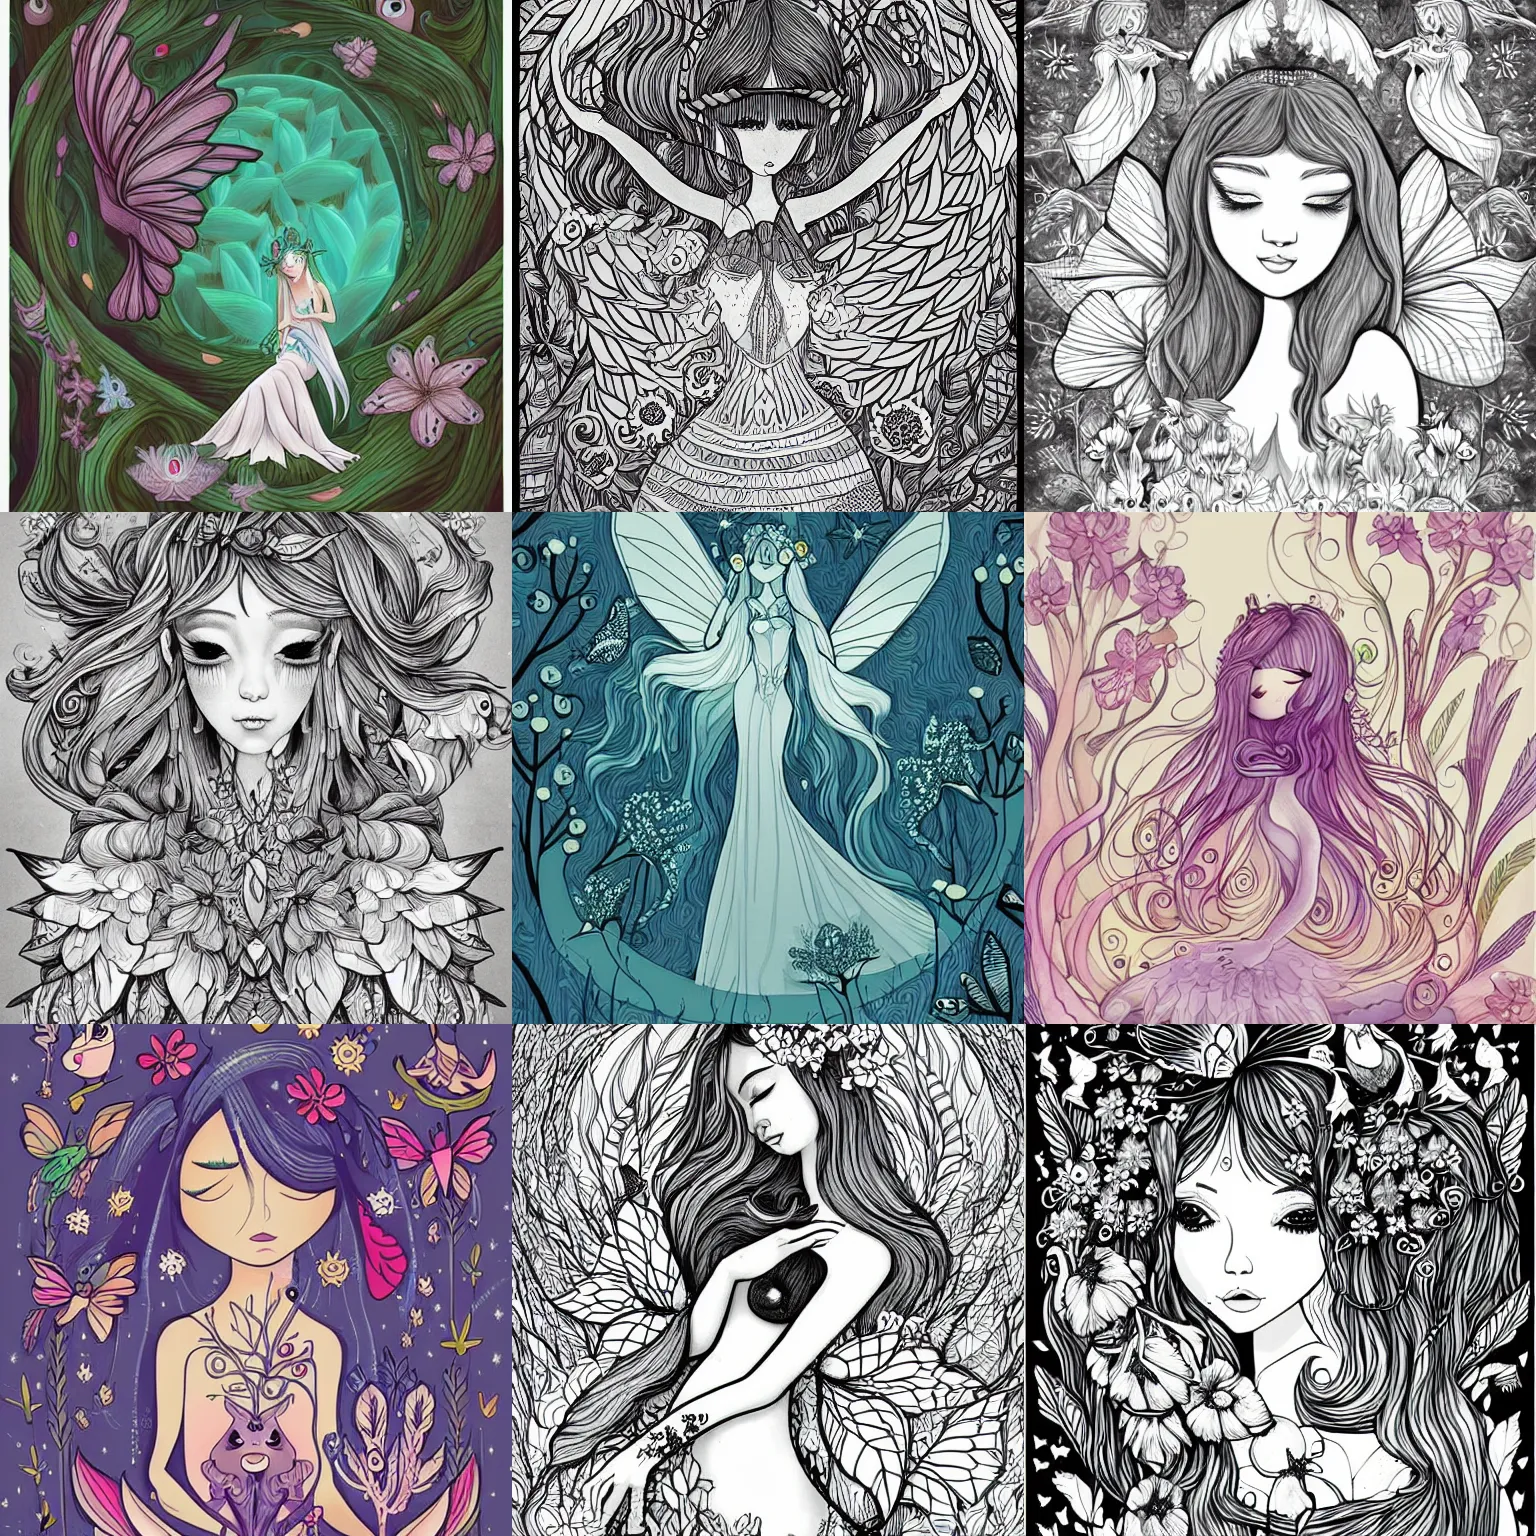 Prompt: magical line art illustrations of ethereal fantasy creatures, beautiful fairies, mermaids and female portraits with flowers, whimsical big - eyed characters accompanied by animals and birds